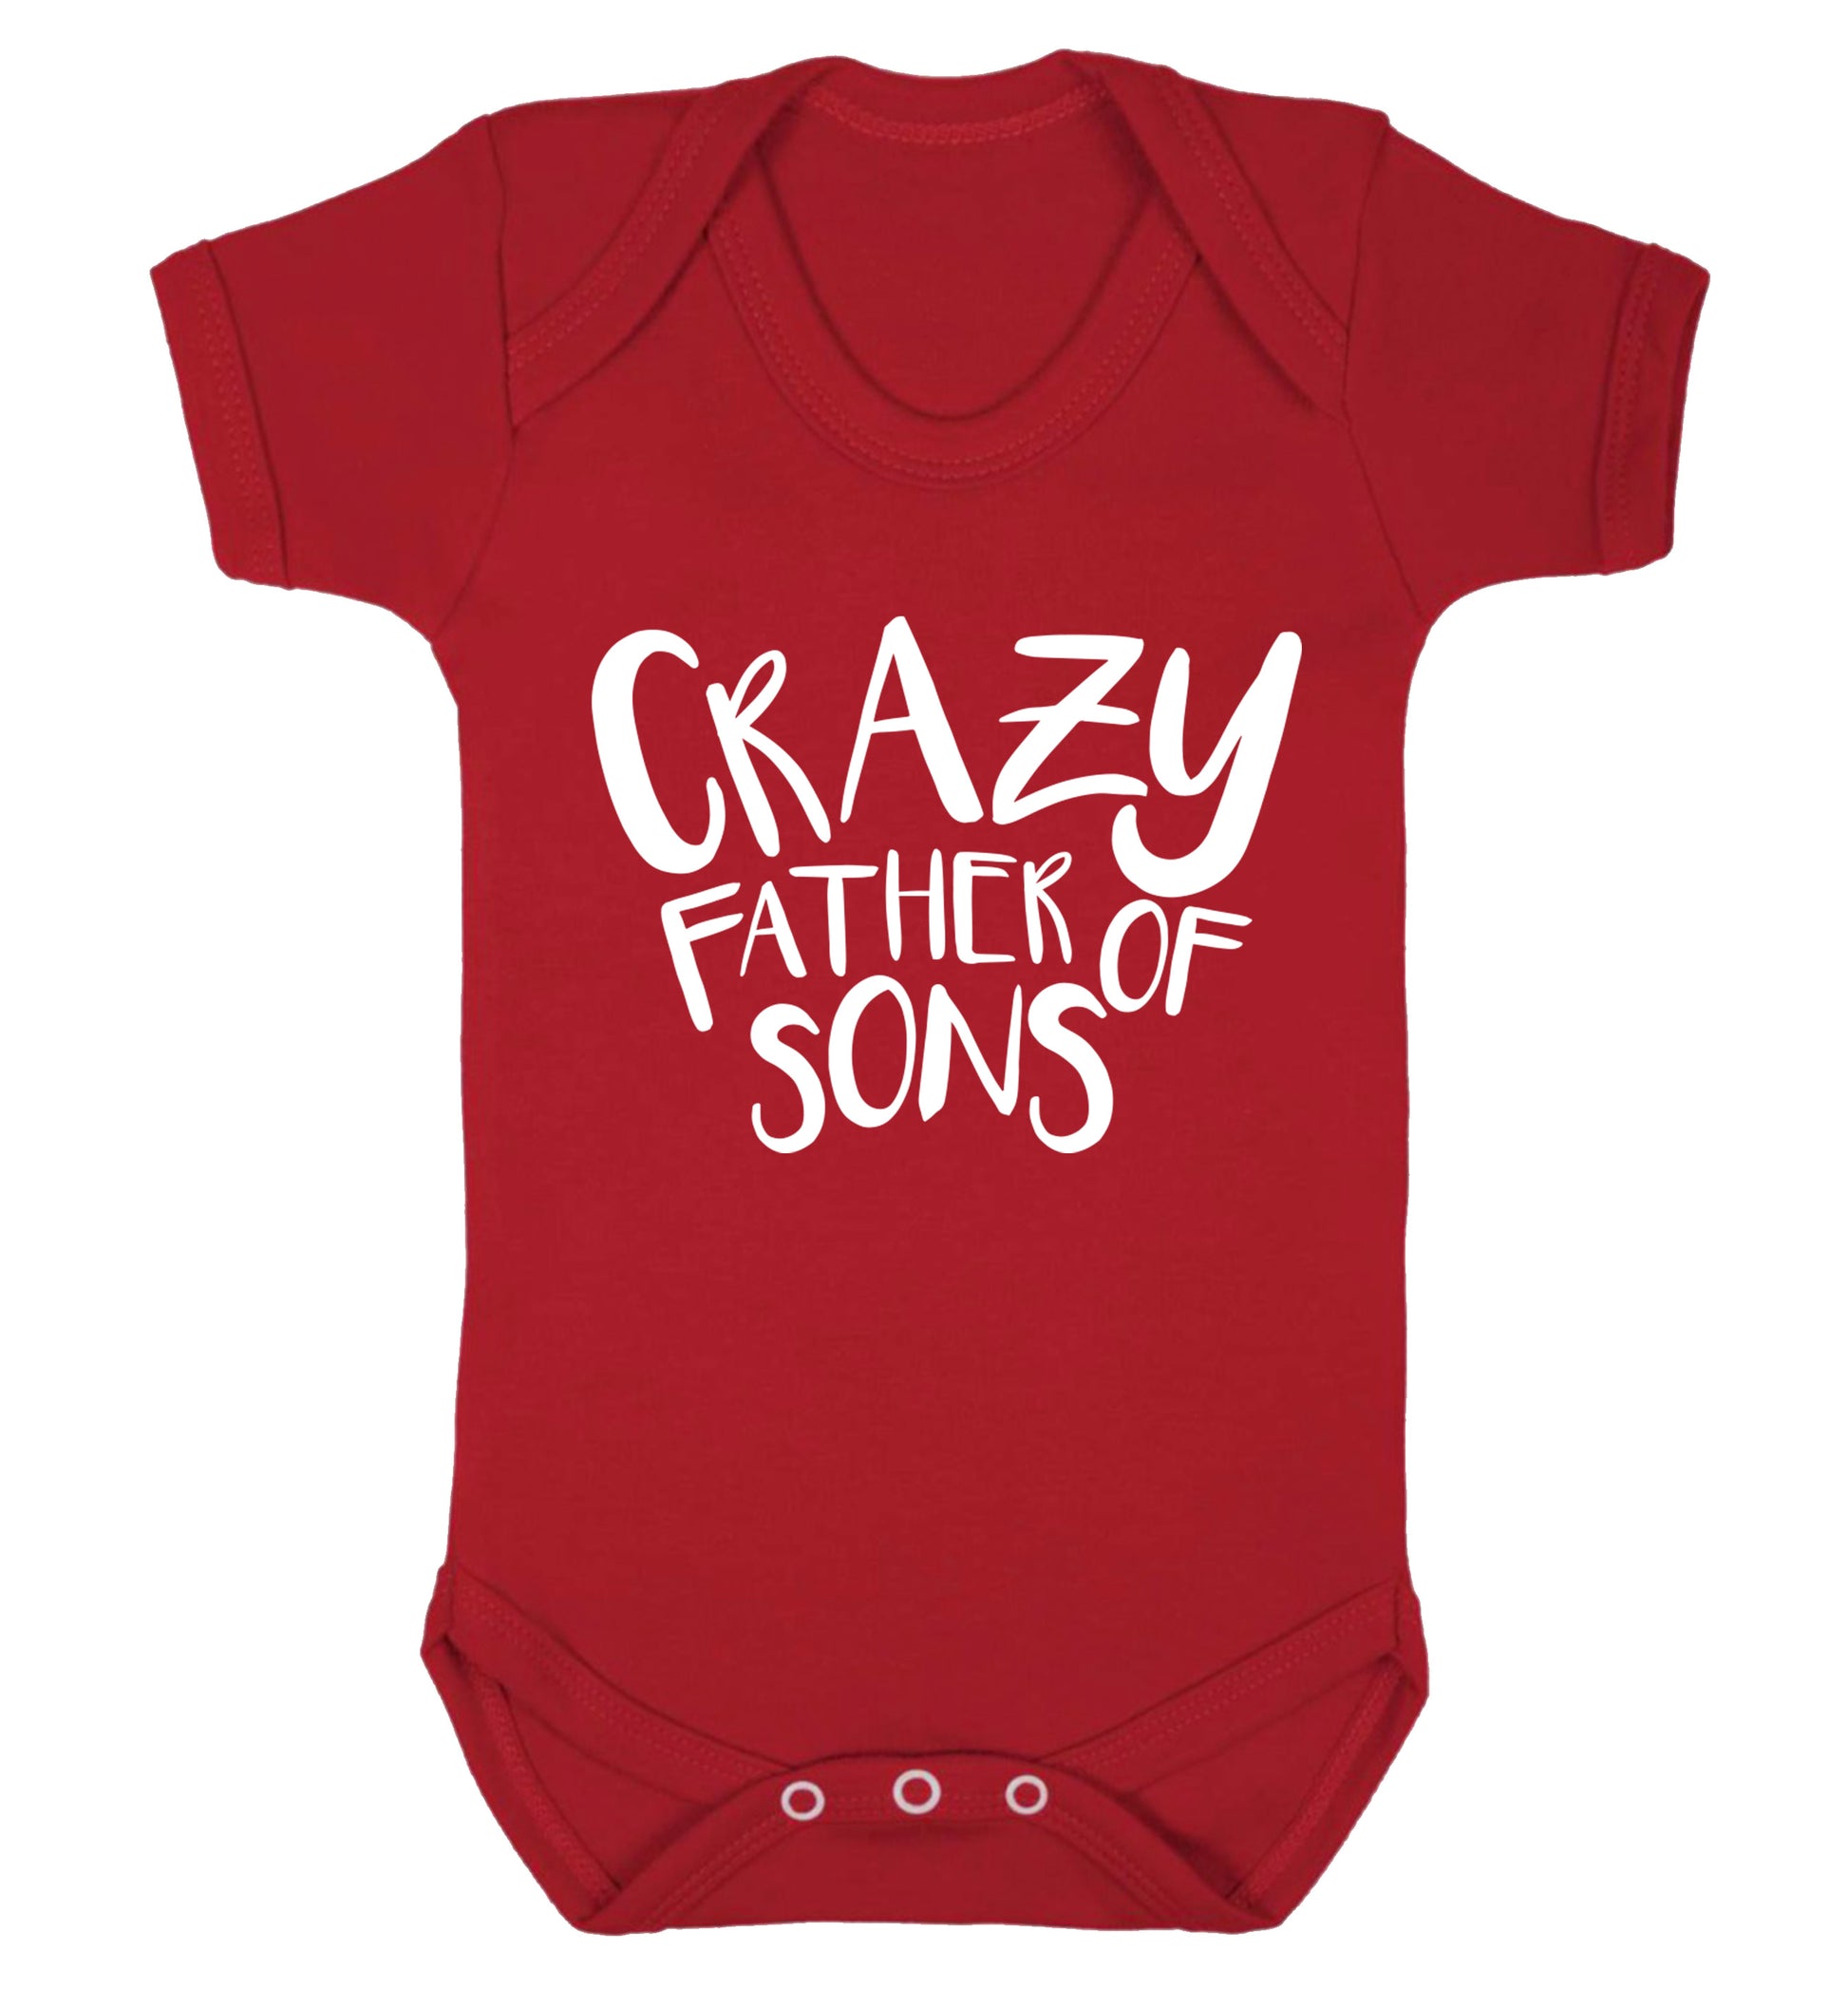 Crazy father of sons Baby Vest red 18-24 months